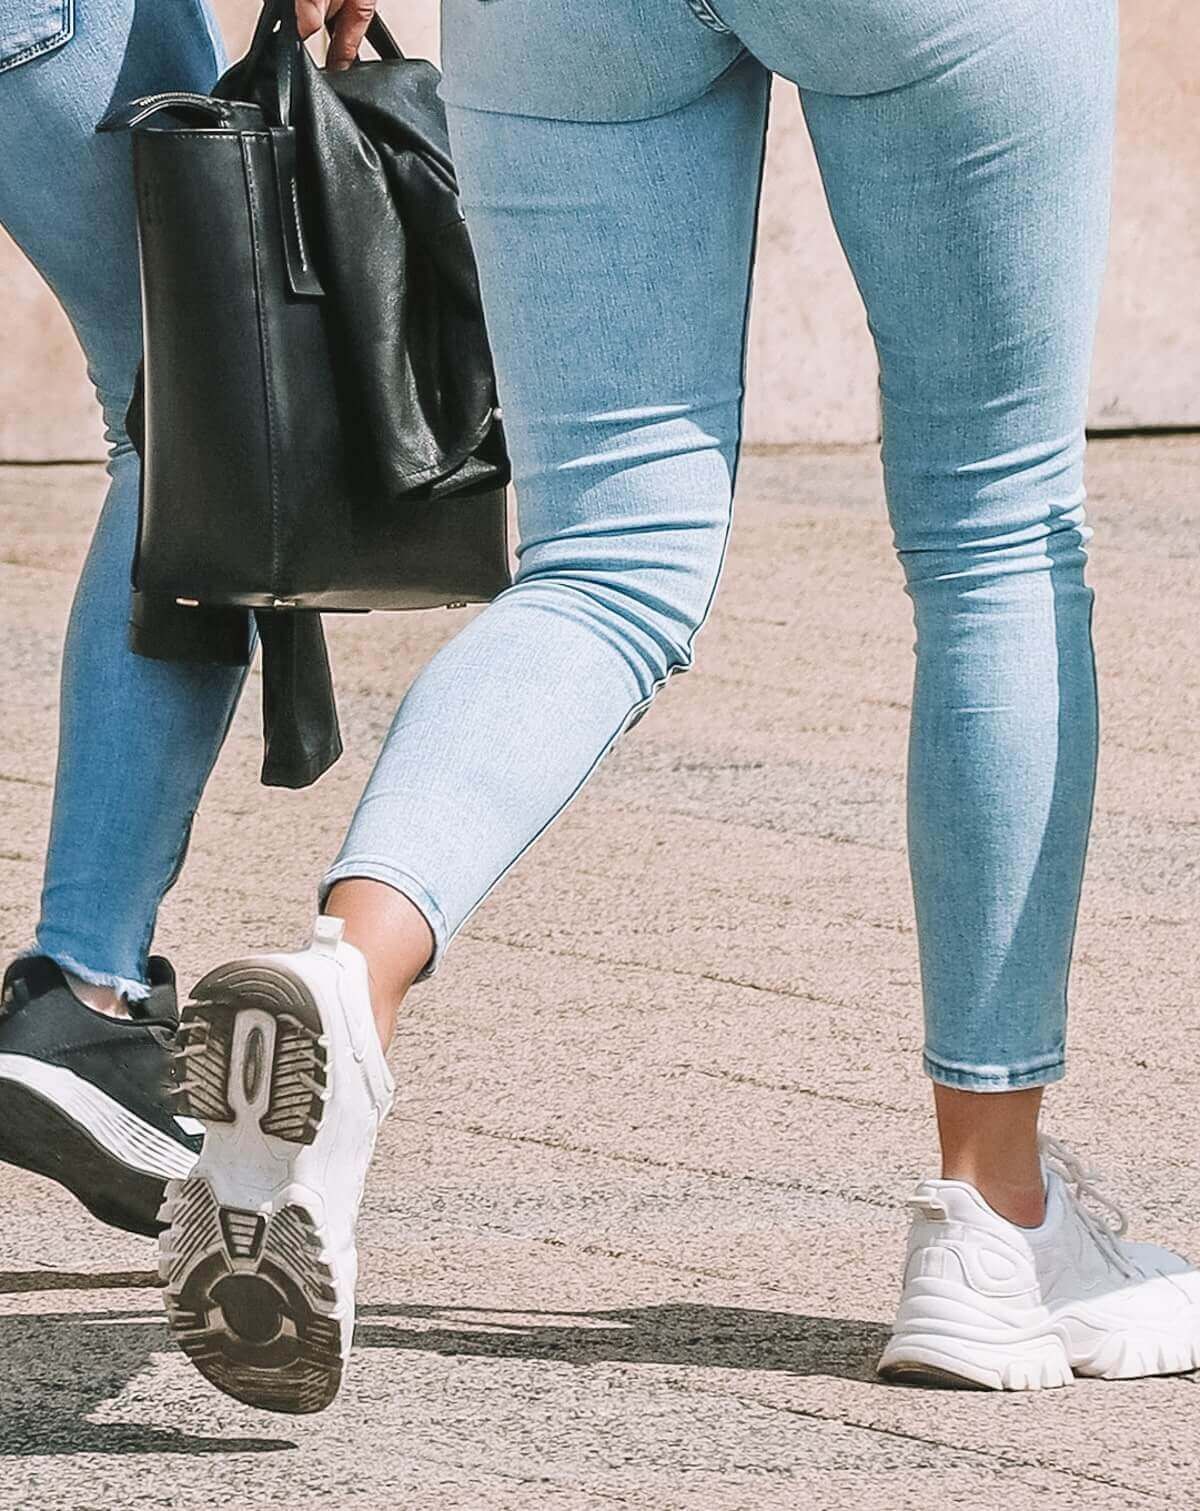 Two sets of women's legs wearing jeans and comfortable walking shoes, some of the best shoes for Disneyland, strolling on a concrete sidewalk on a sunny day.